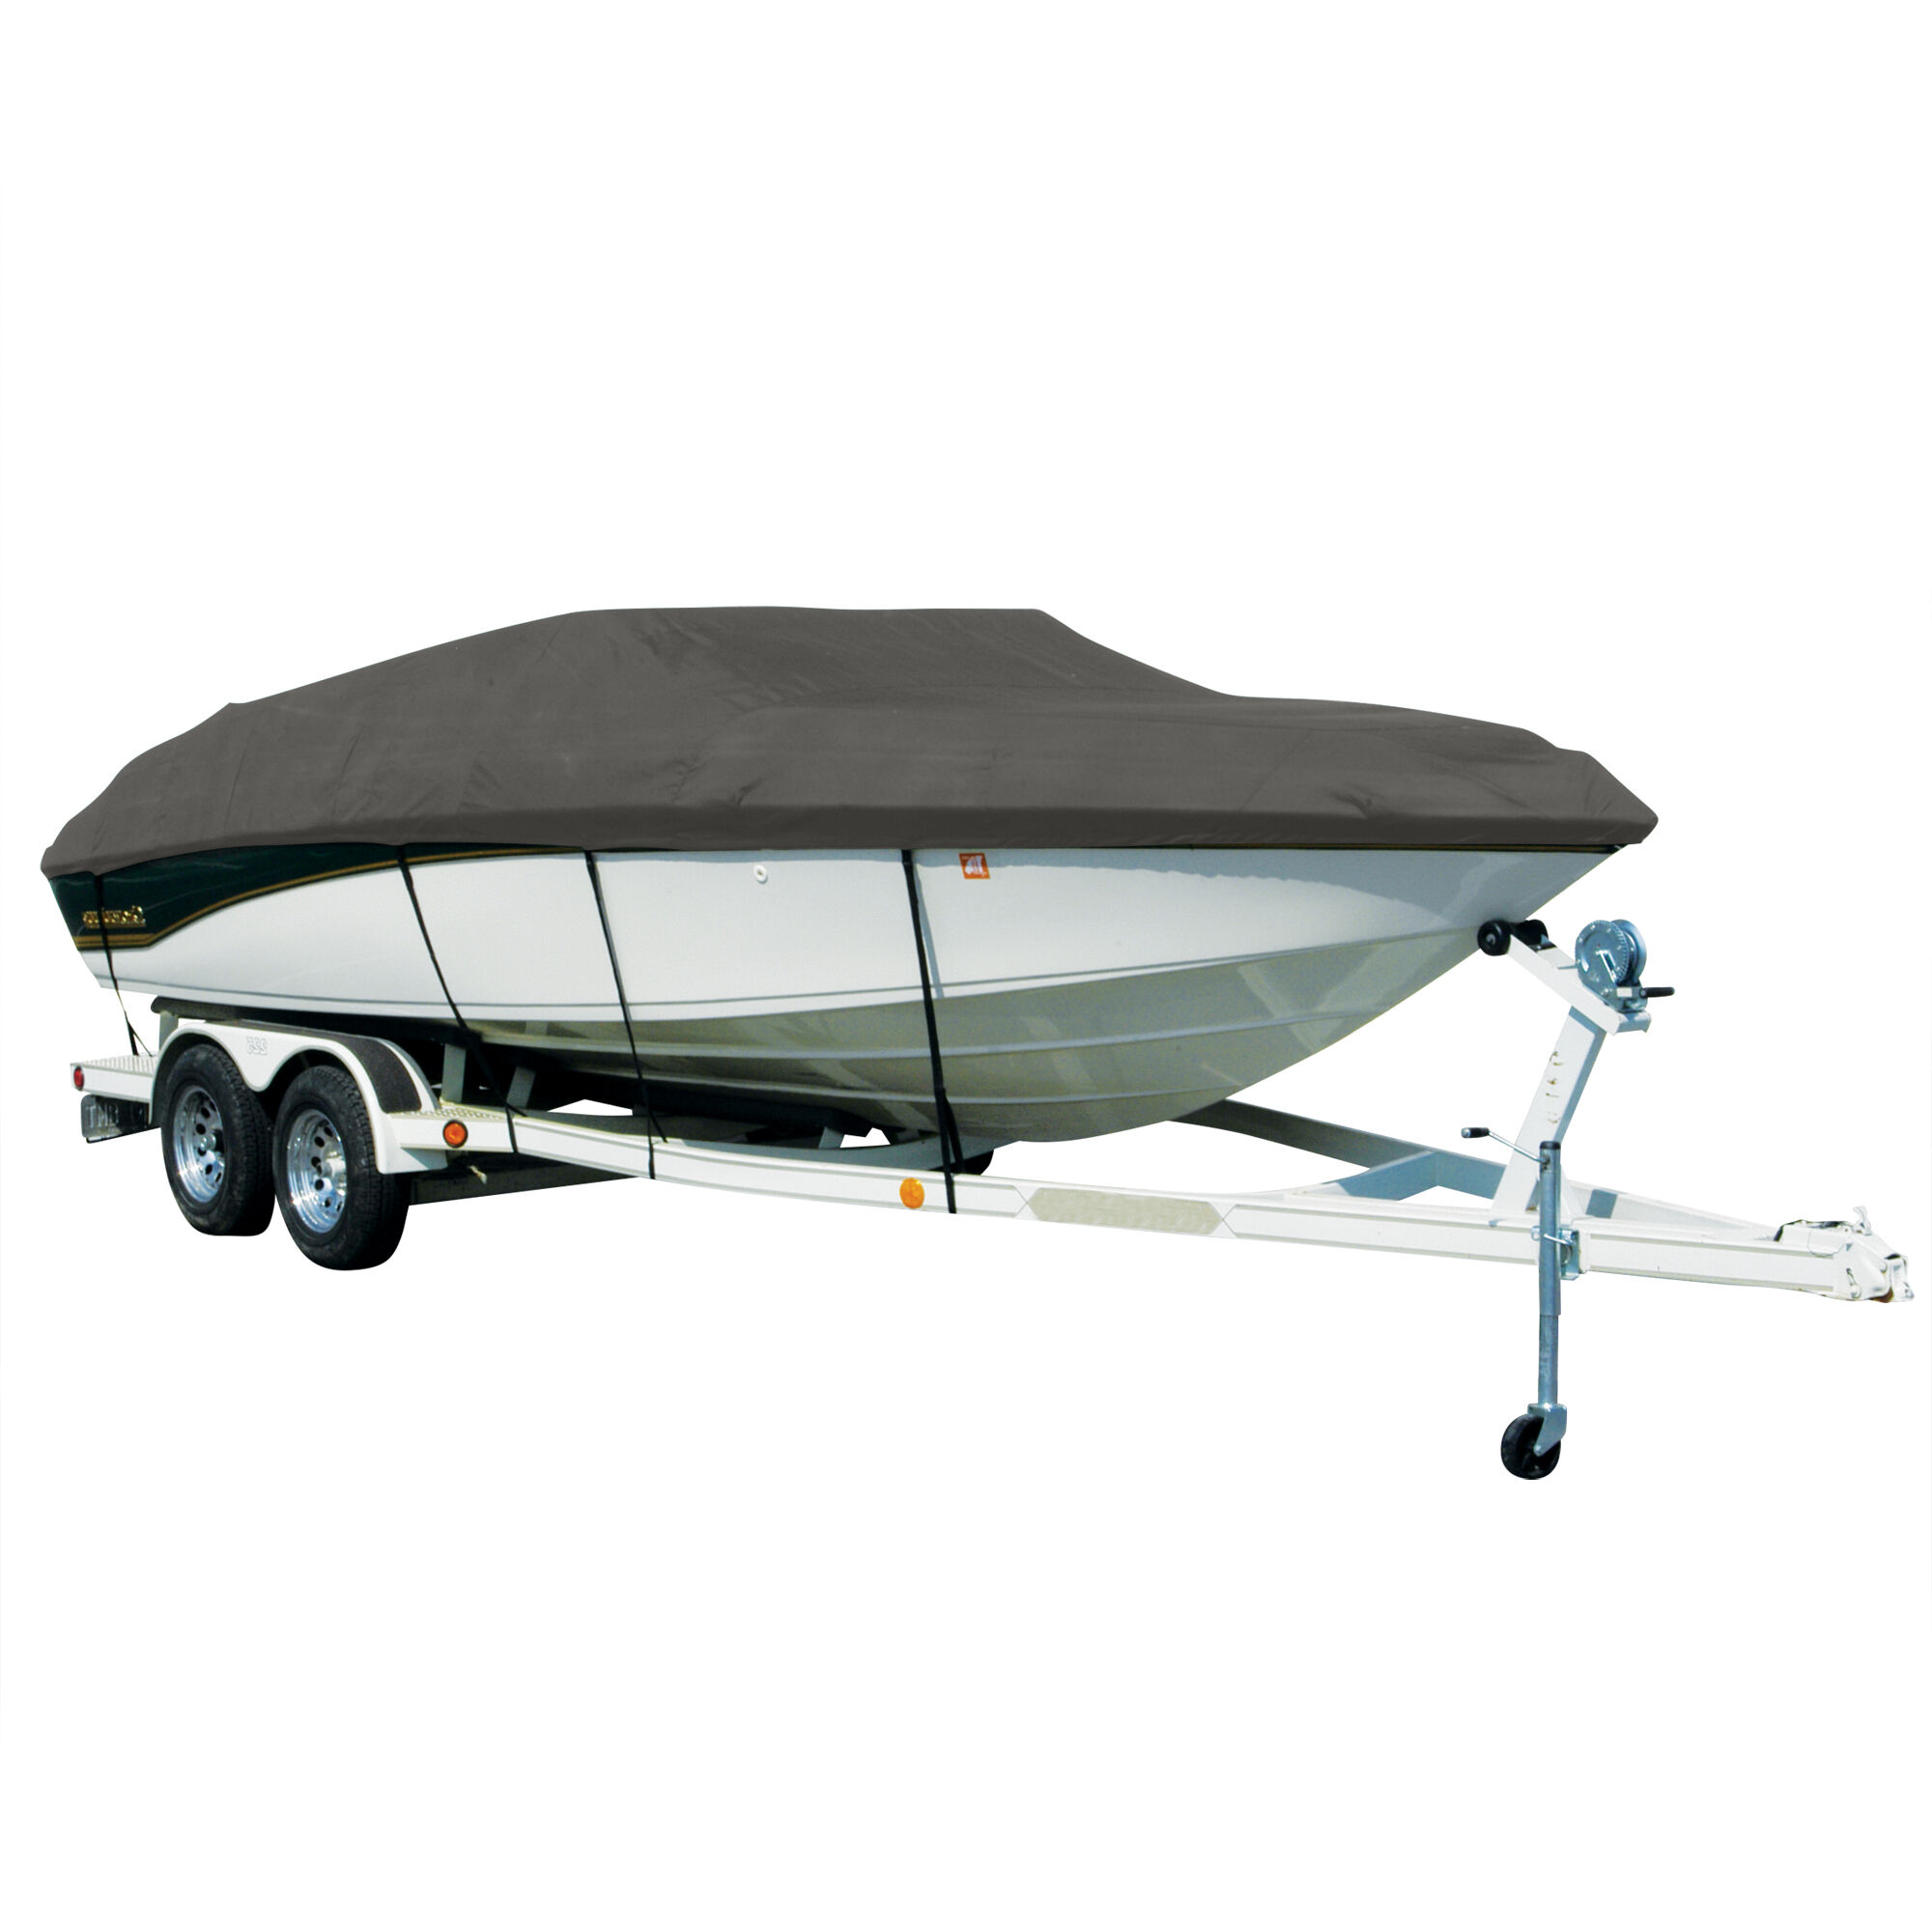 Covermate 21DCX/X2050 DC w/ PORT TROLL MOTOR BK Boat Cover in Charcoal